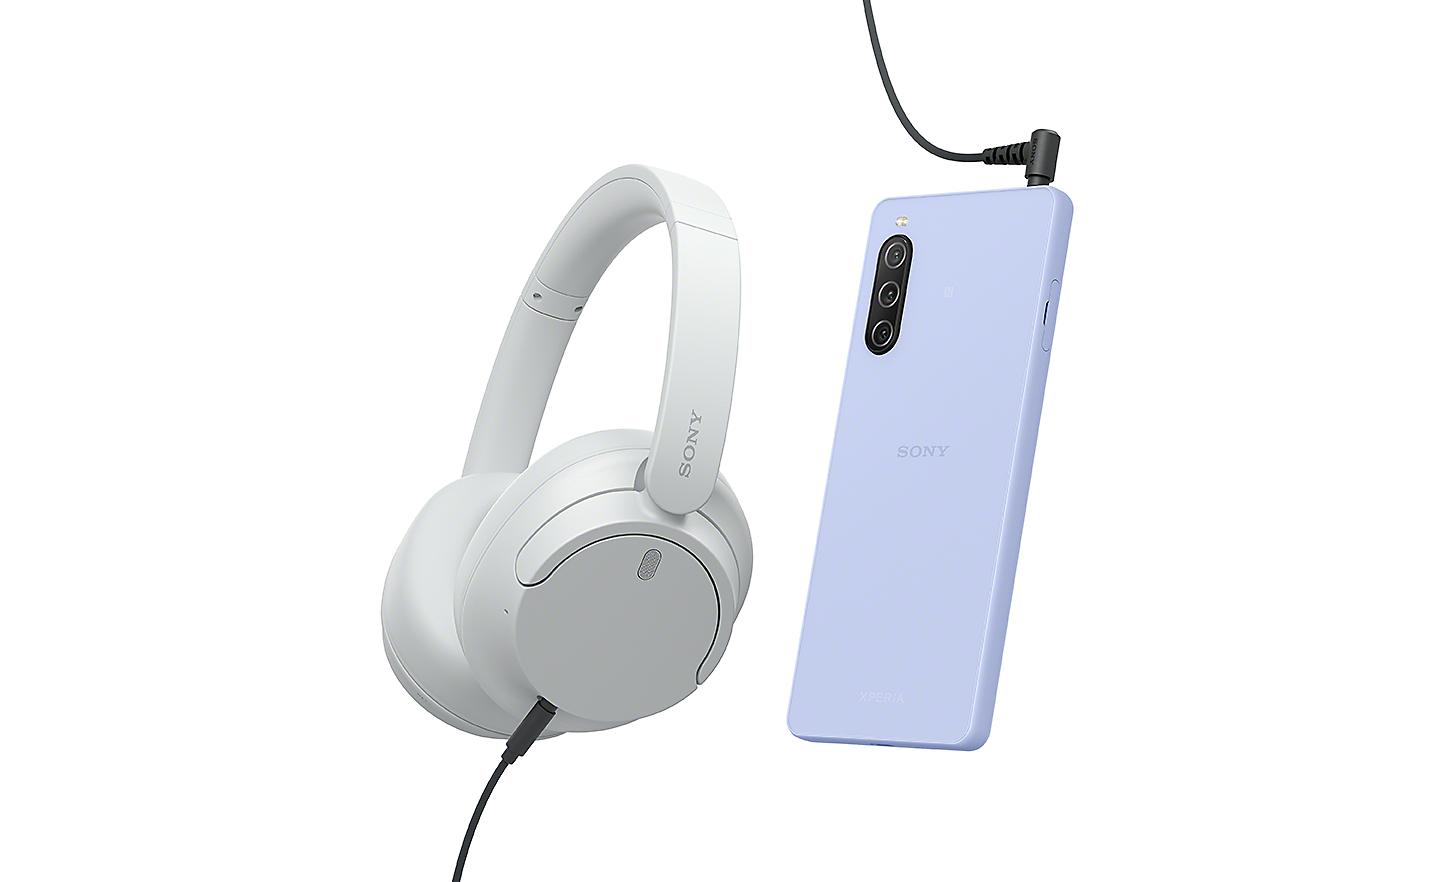 Xperia 10 V in Lavender, connected to wired headphones via the 3.5mm audio jack